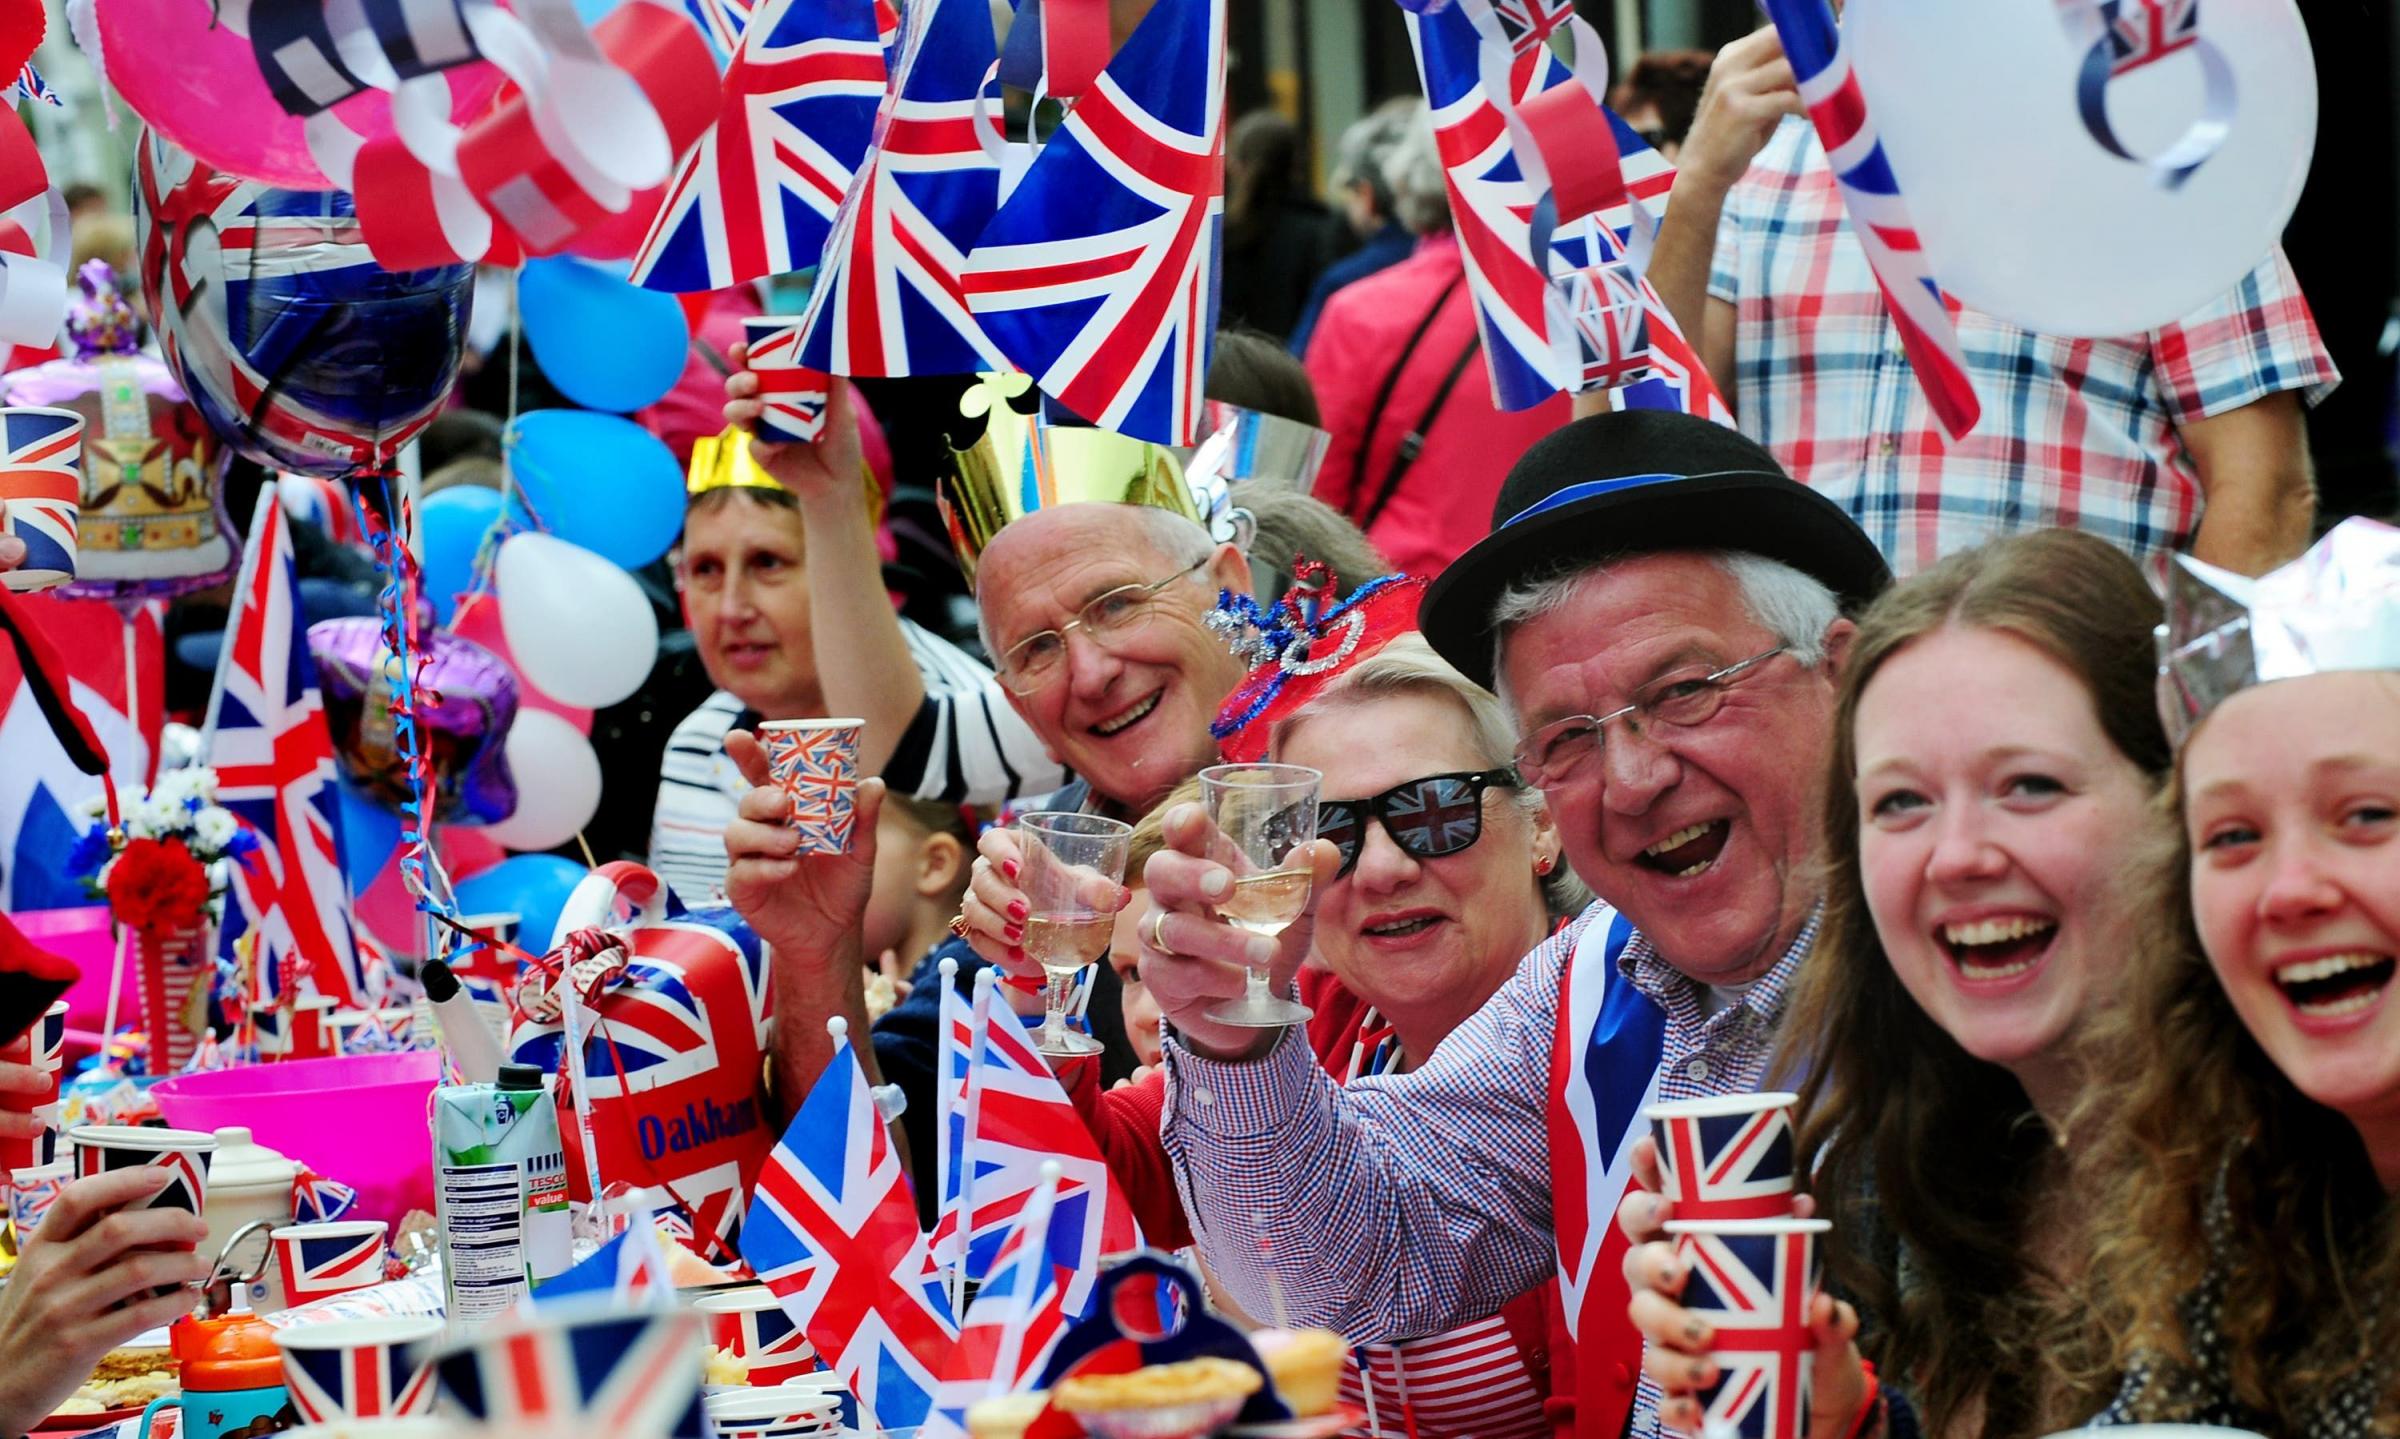 More than 85,000 people have signed up to host Big Jubilee Lunches, the official community celebration for the Queen’s Platinum Jubilee Picture: PA Images